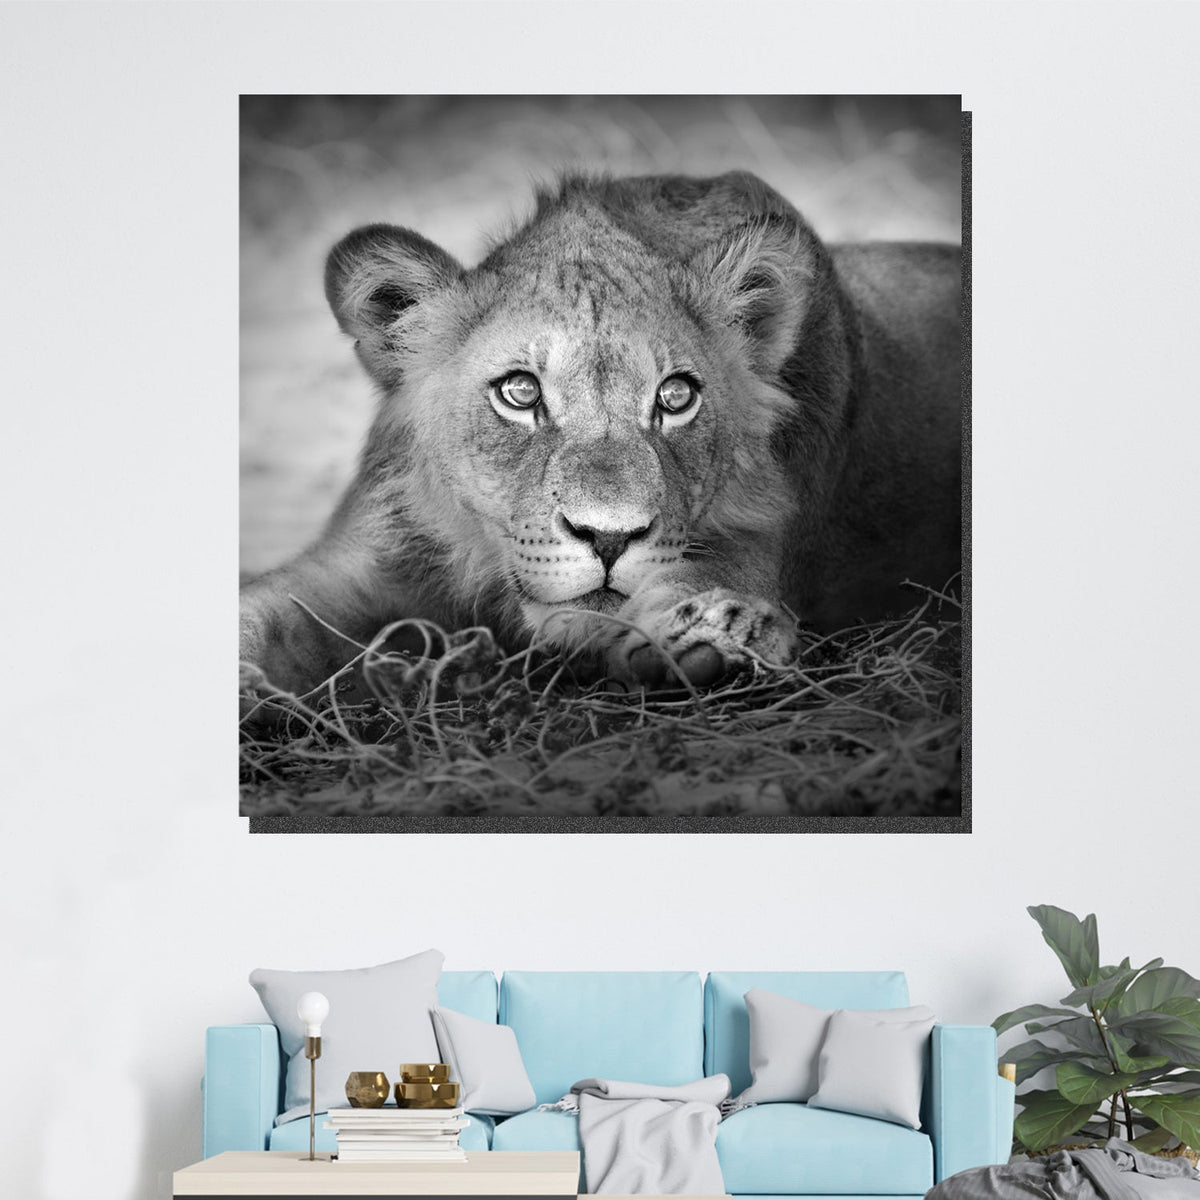 https://cdn.shopify.com/s/files/1/0387/9986/8044/products/ATeenLionCanvasArtprintStretched-3.jpg